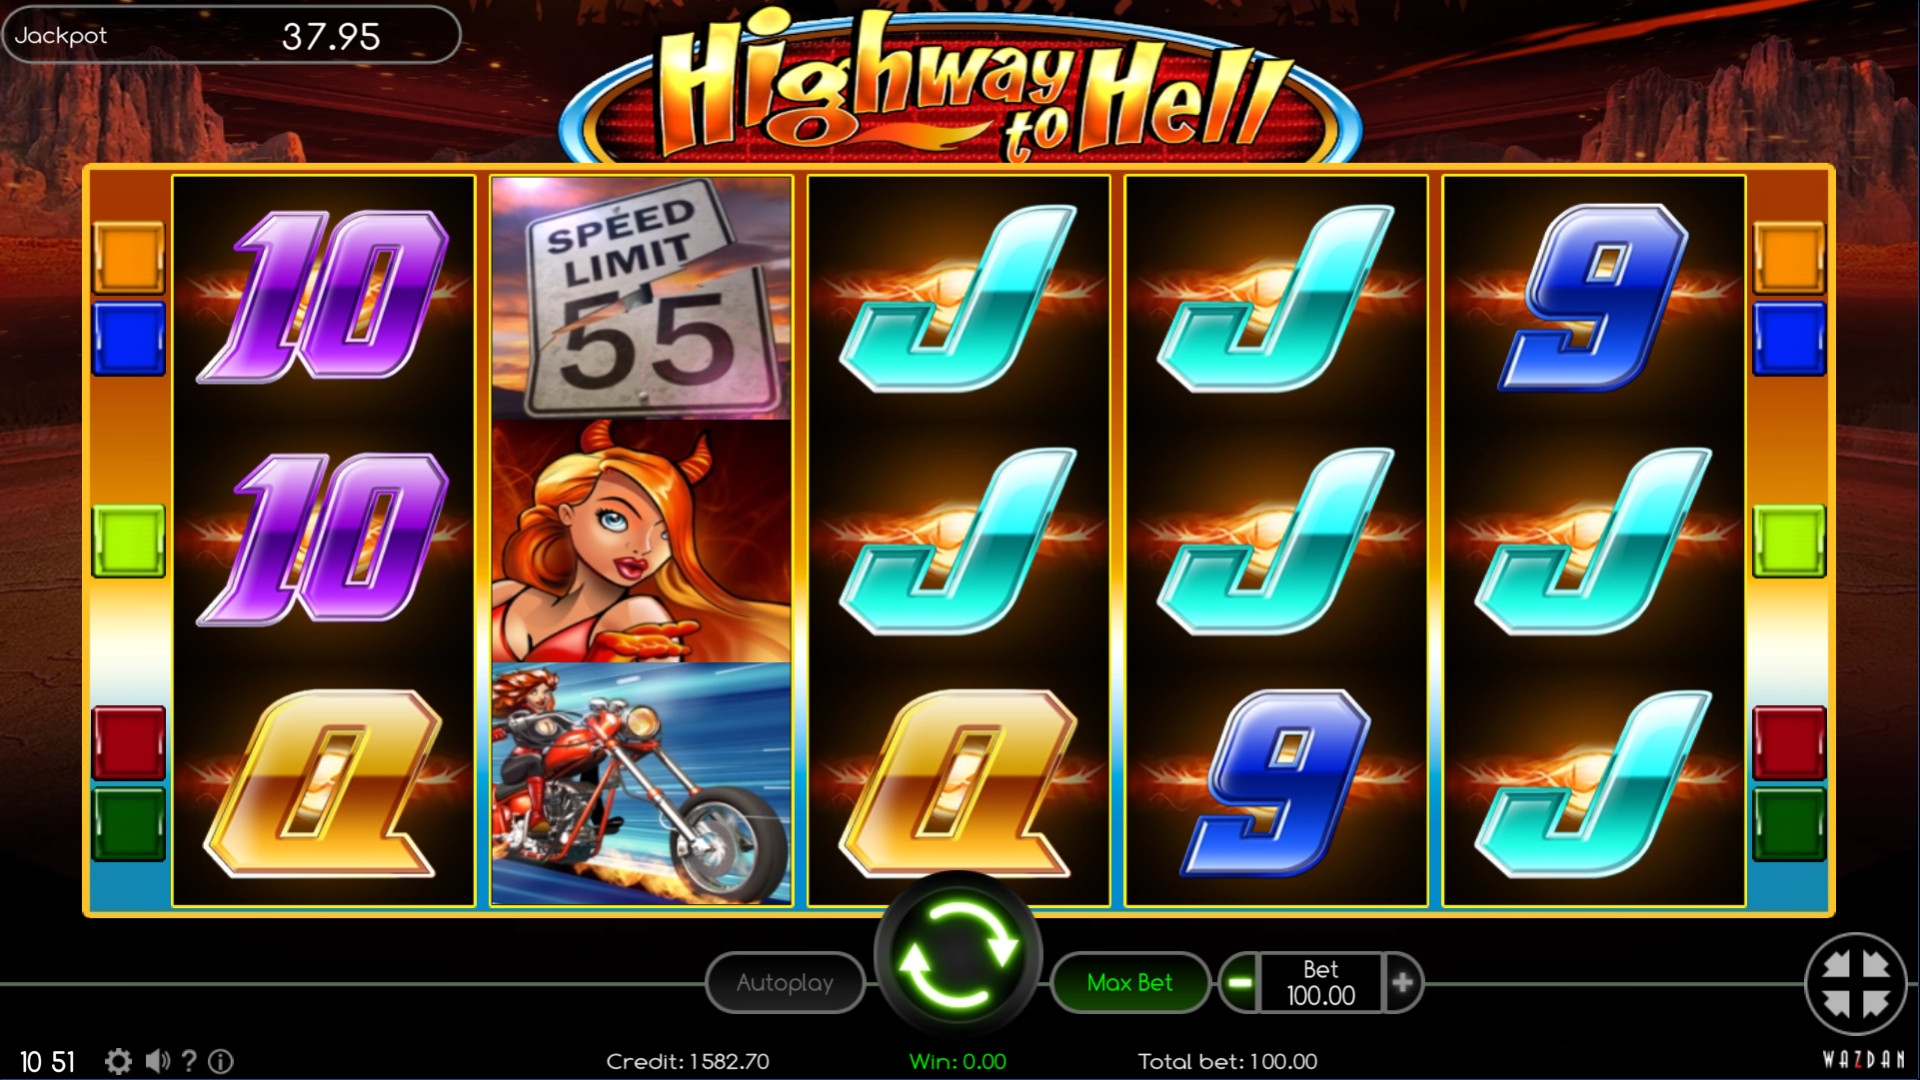 Highway to Hell (Highway to Hell) from category Slots